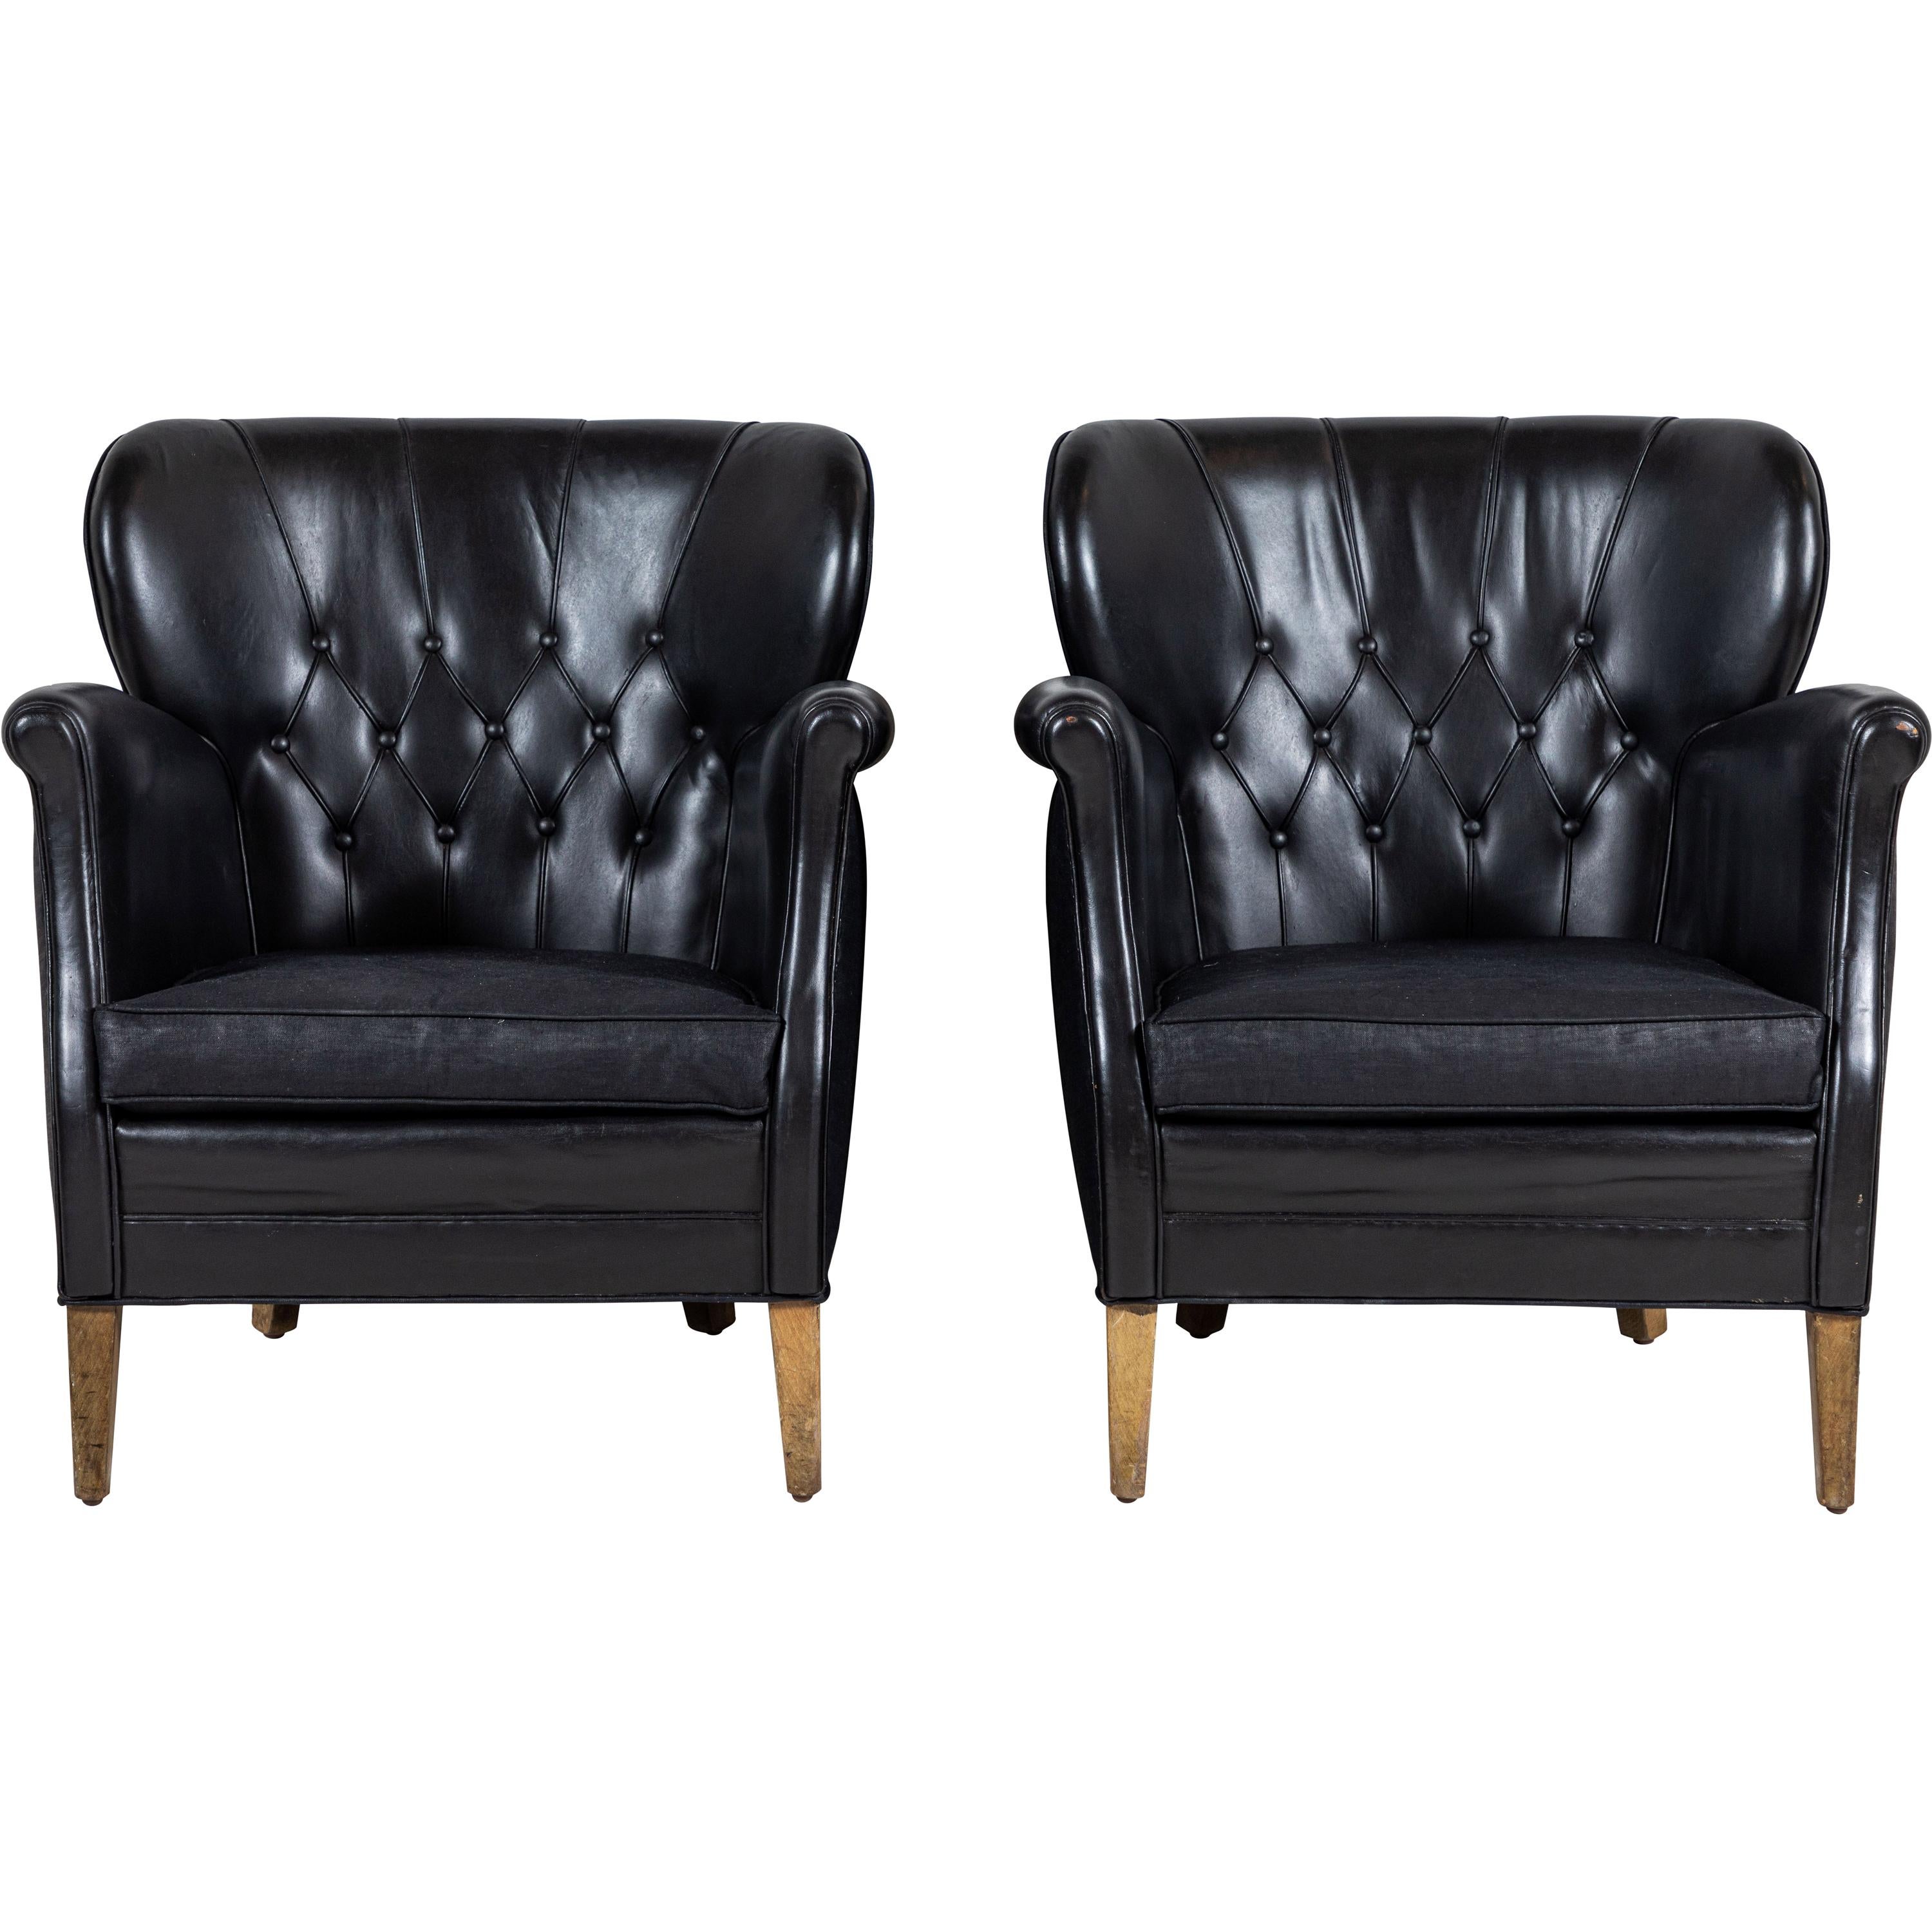 Danish Style Black Leather Tufted Pair of Chairs